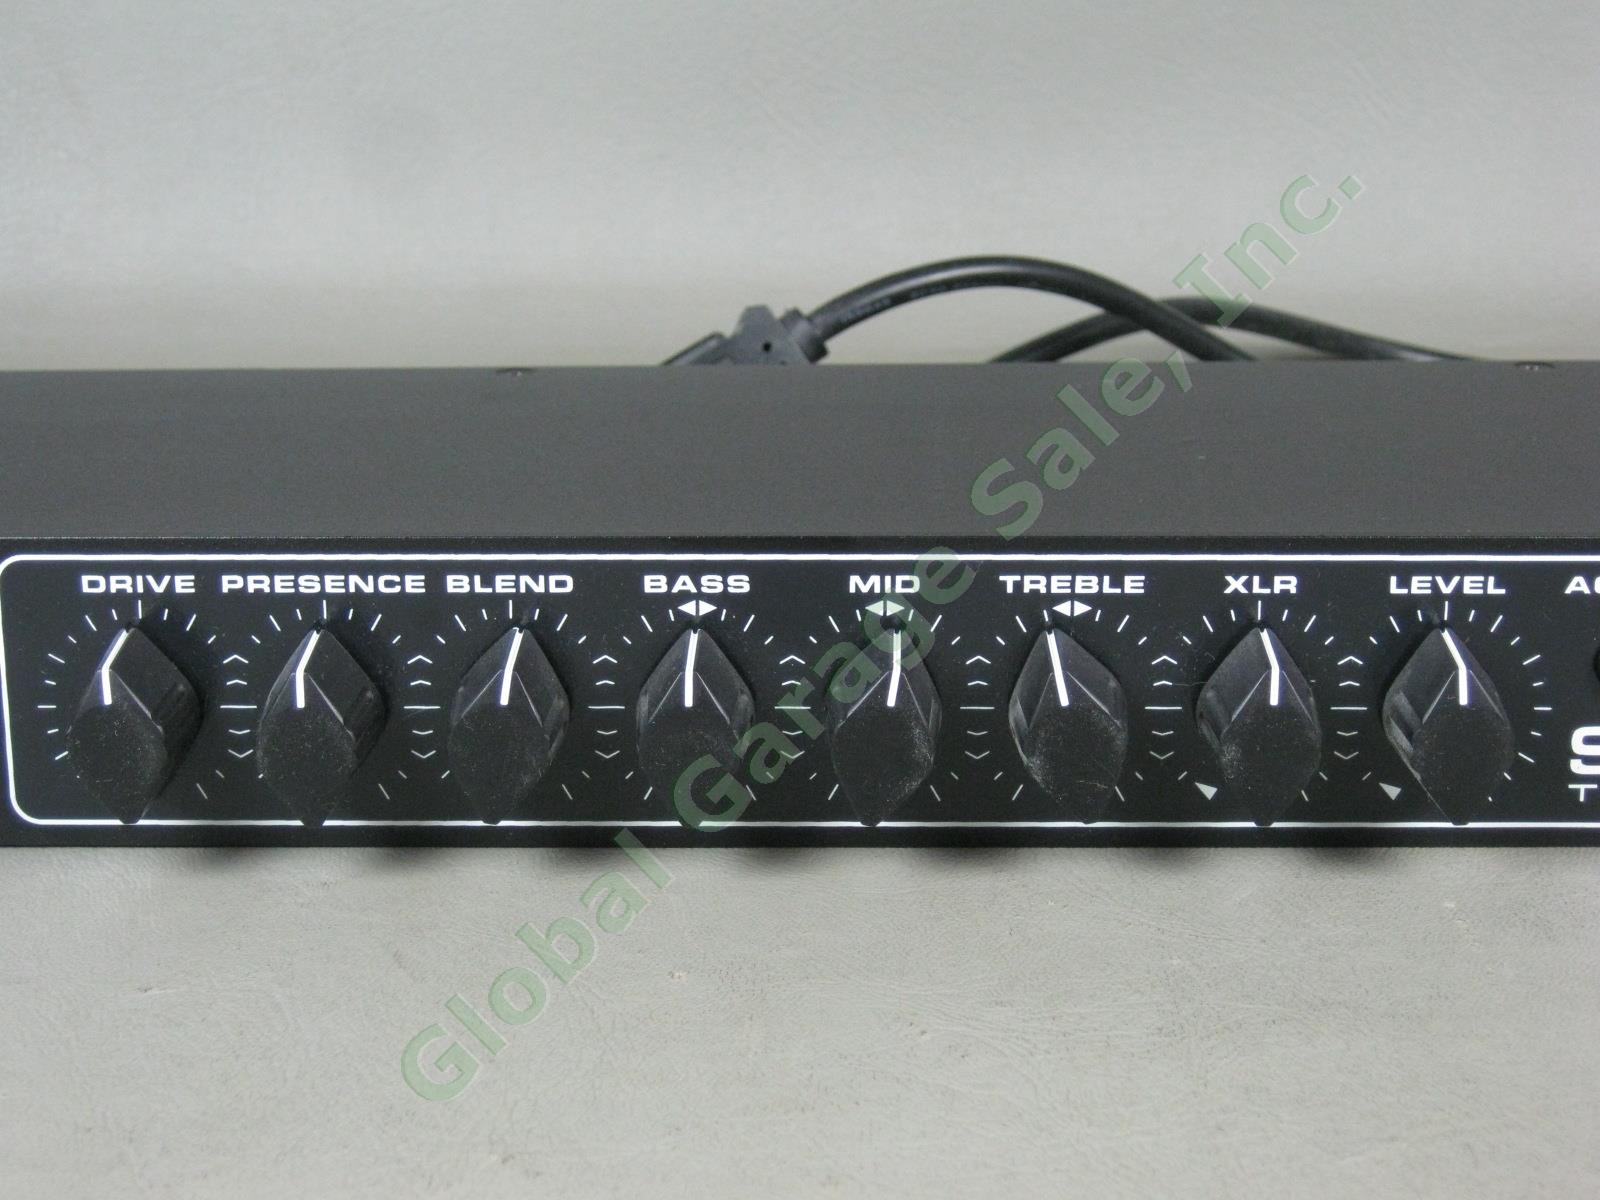 Tech 21 SansAmp RBI Bass Driver Rack Mount Preamp One Owner Exc Cond w/Manual NR 2